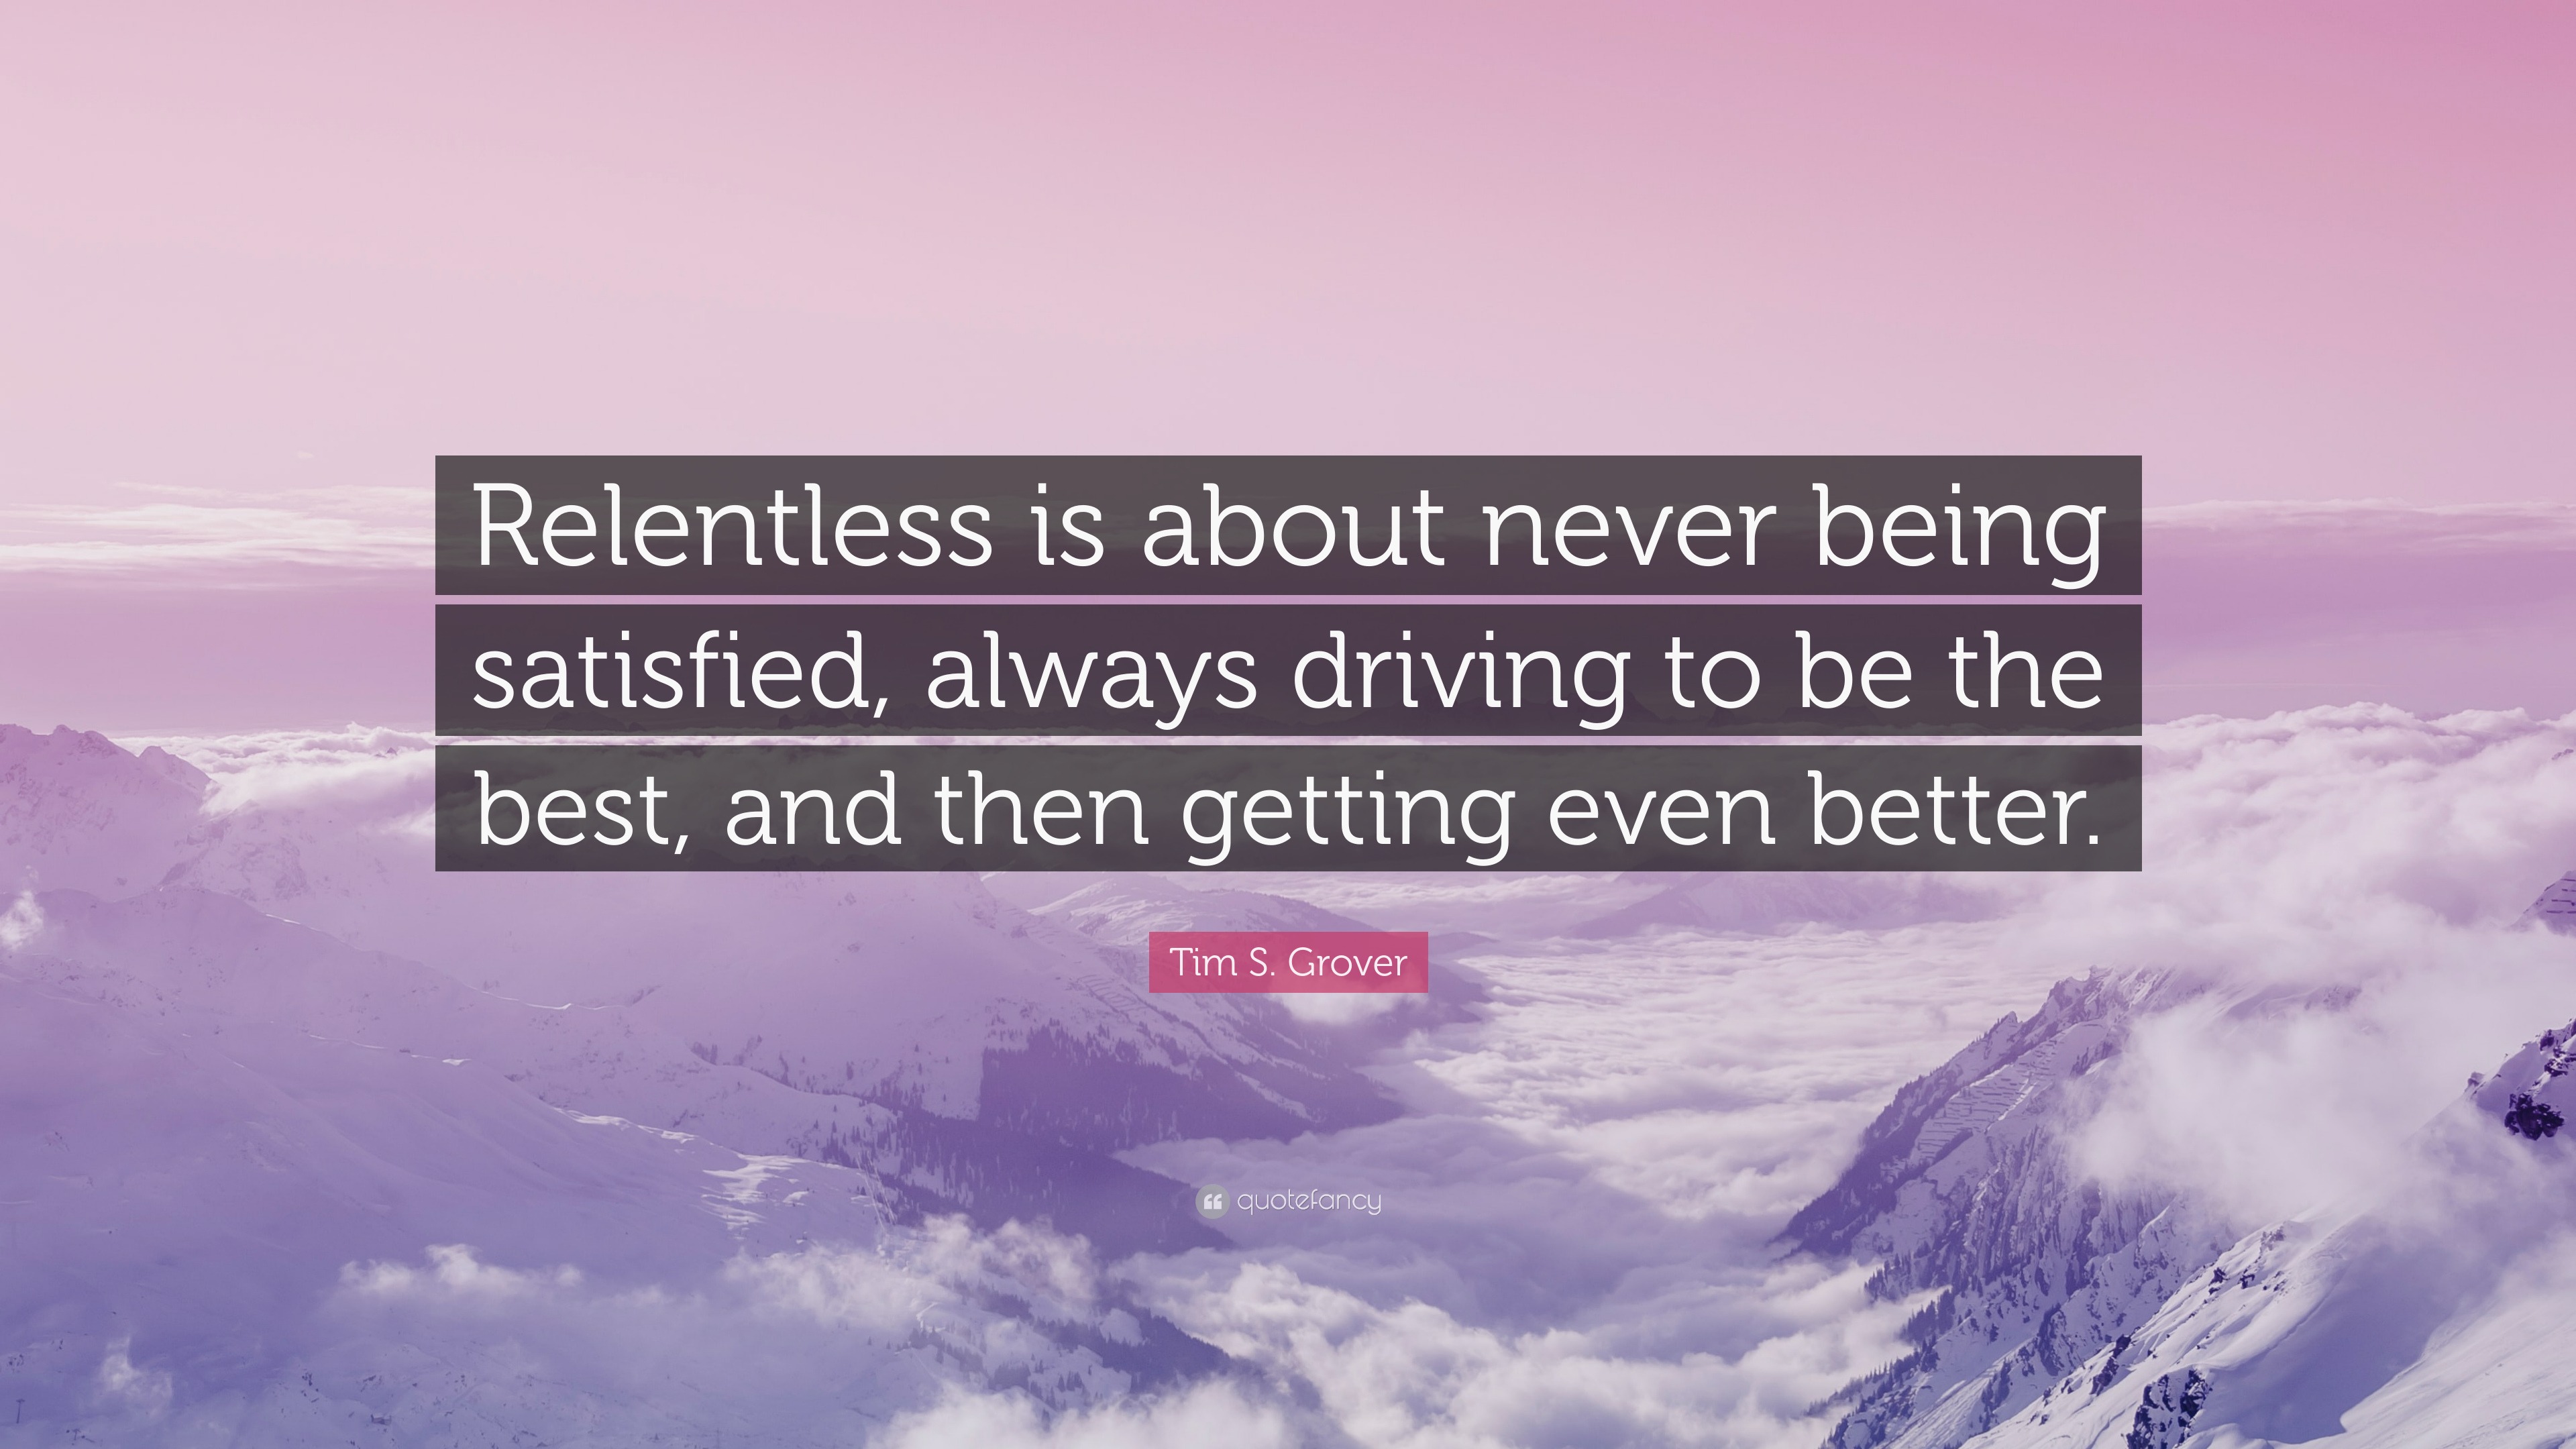 Tim S Grover Quote Relentless is about never being satisfied always  driving to be the best